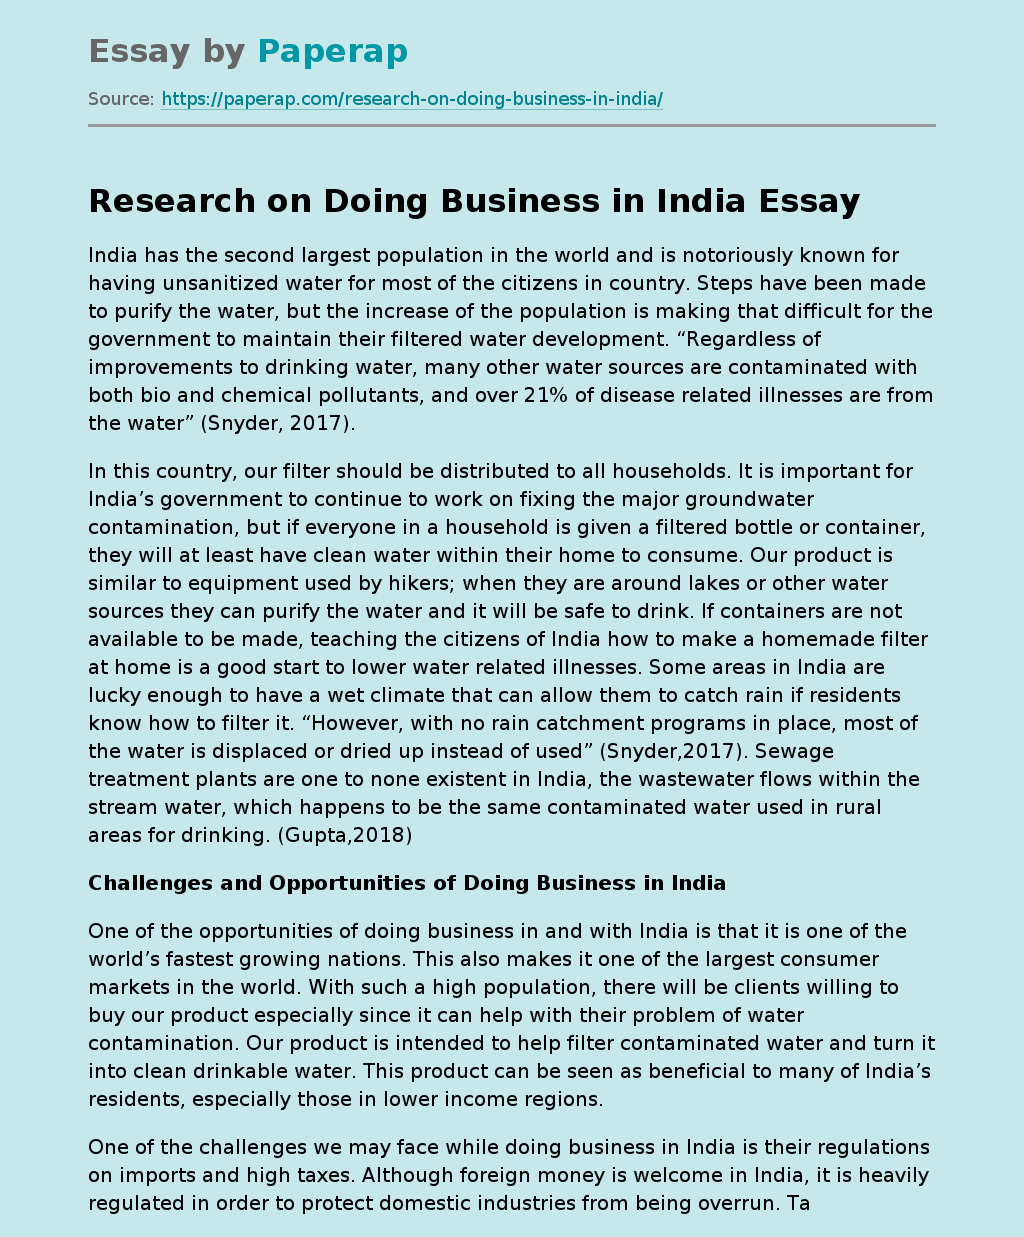 Research on Doing Business in India